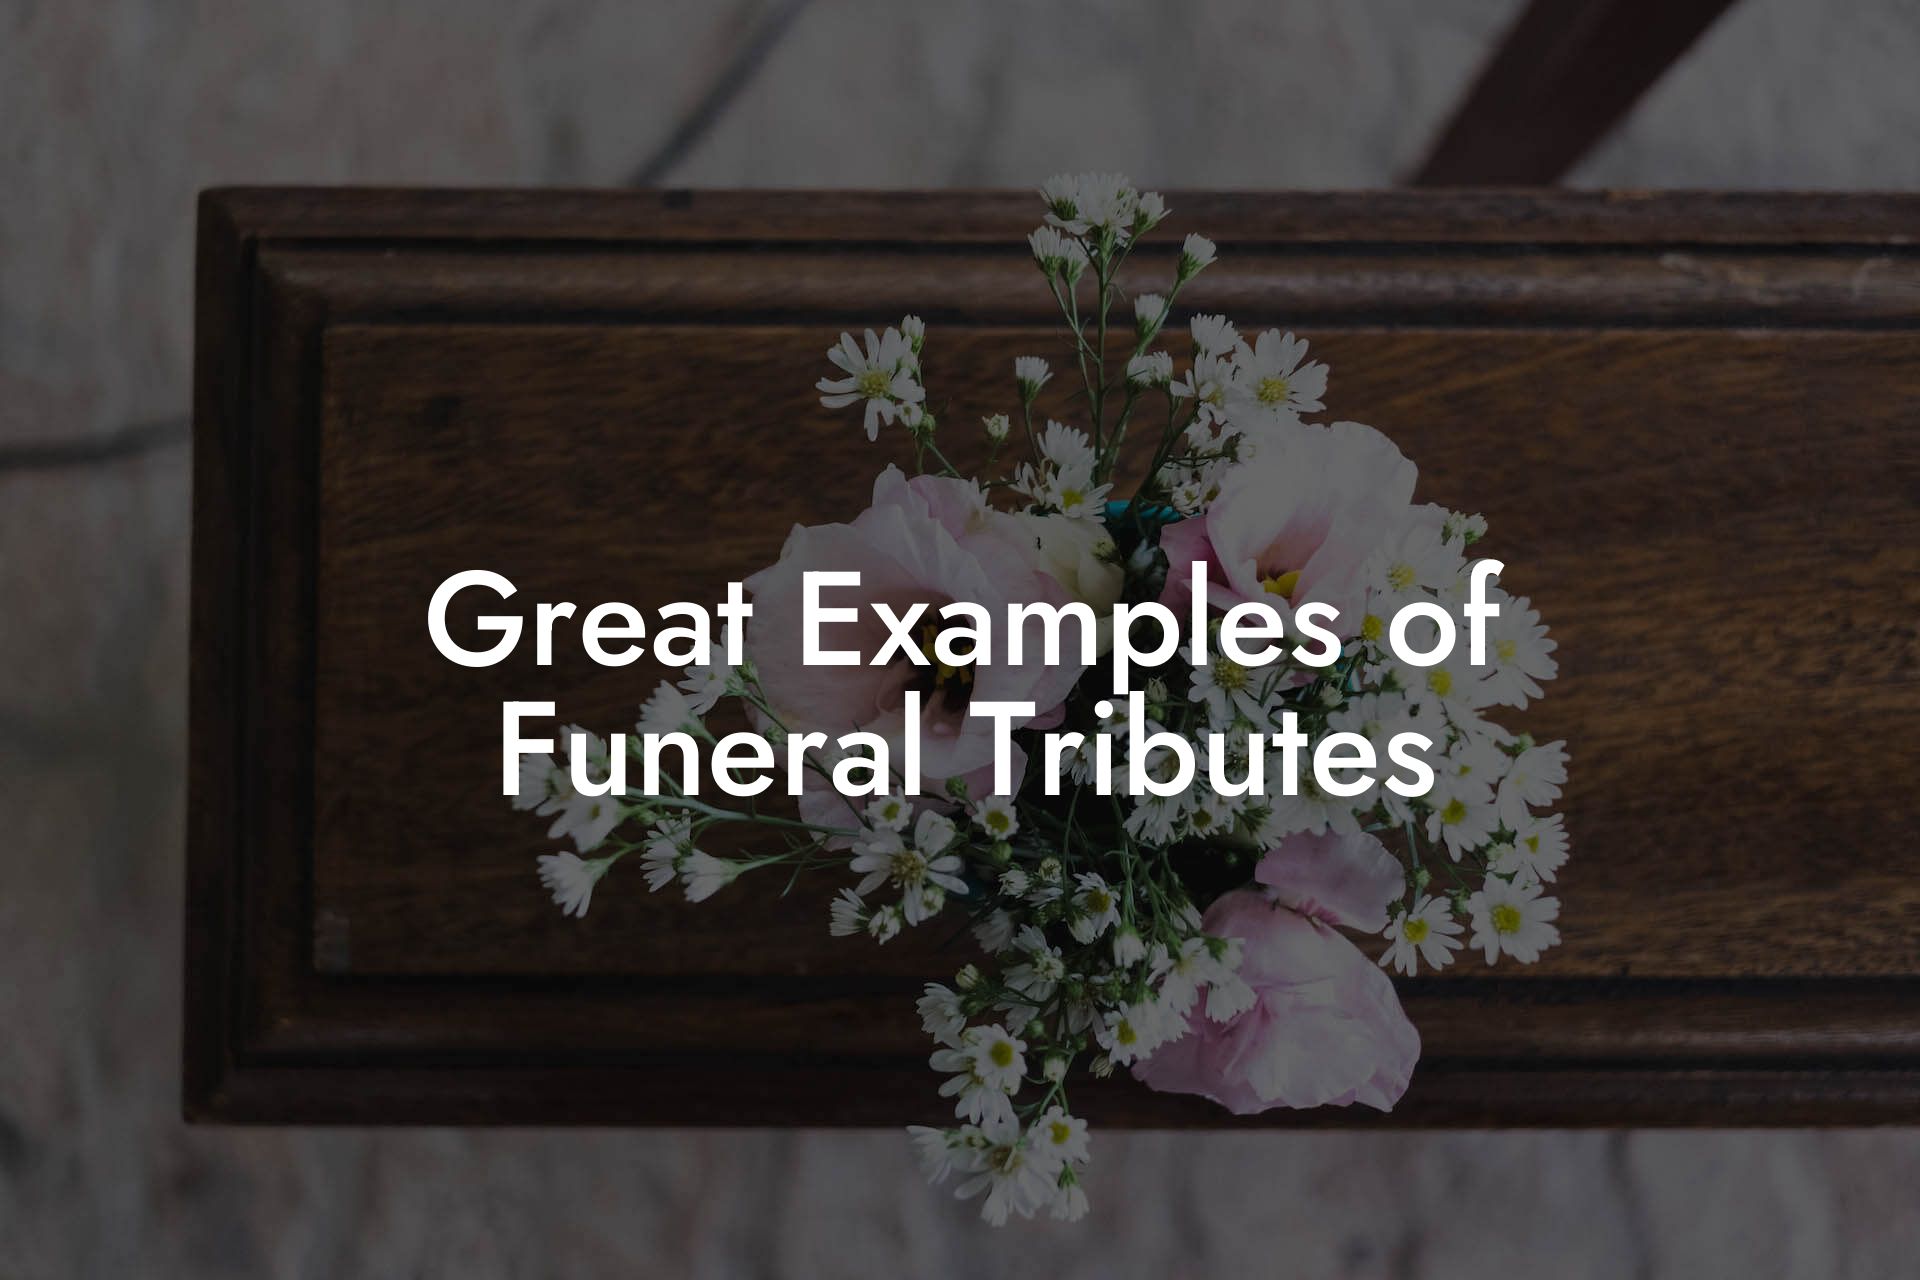 Great Examples of Funeral Tributes